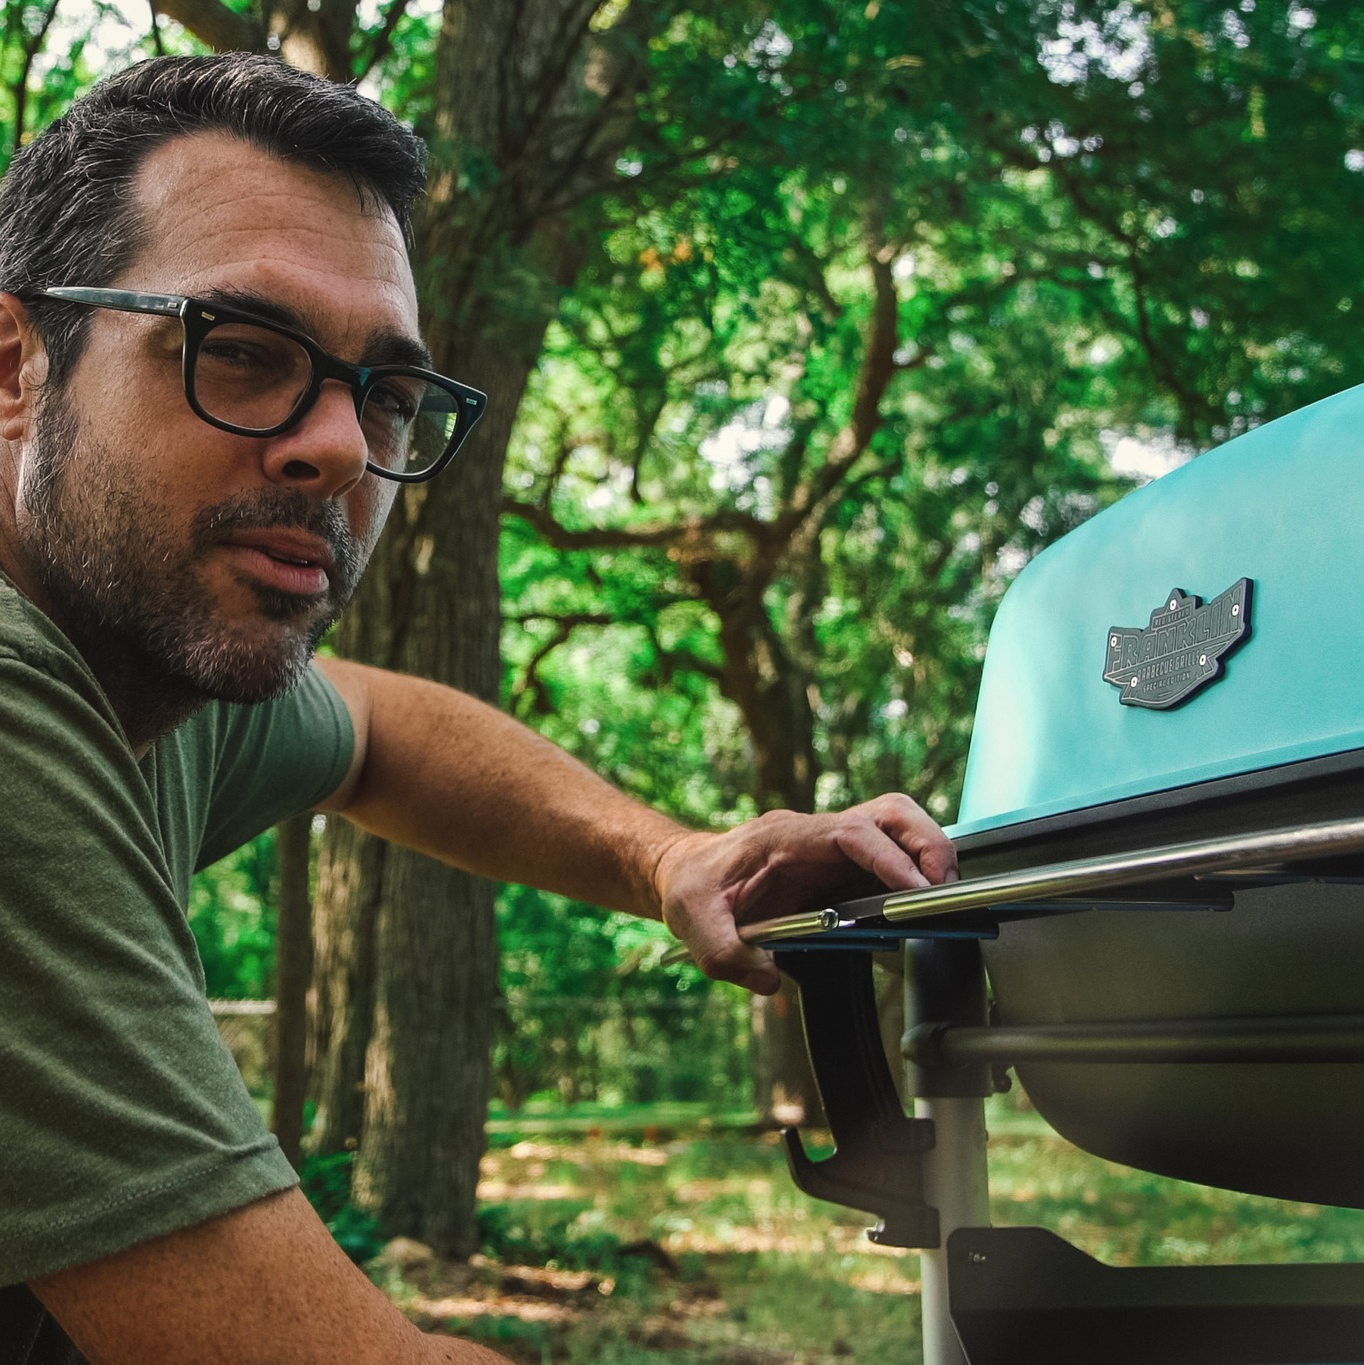 Save $100 on PK Grills, Including The Collaboration With Aaron Franklin of Franklin BBQ